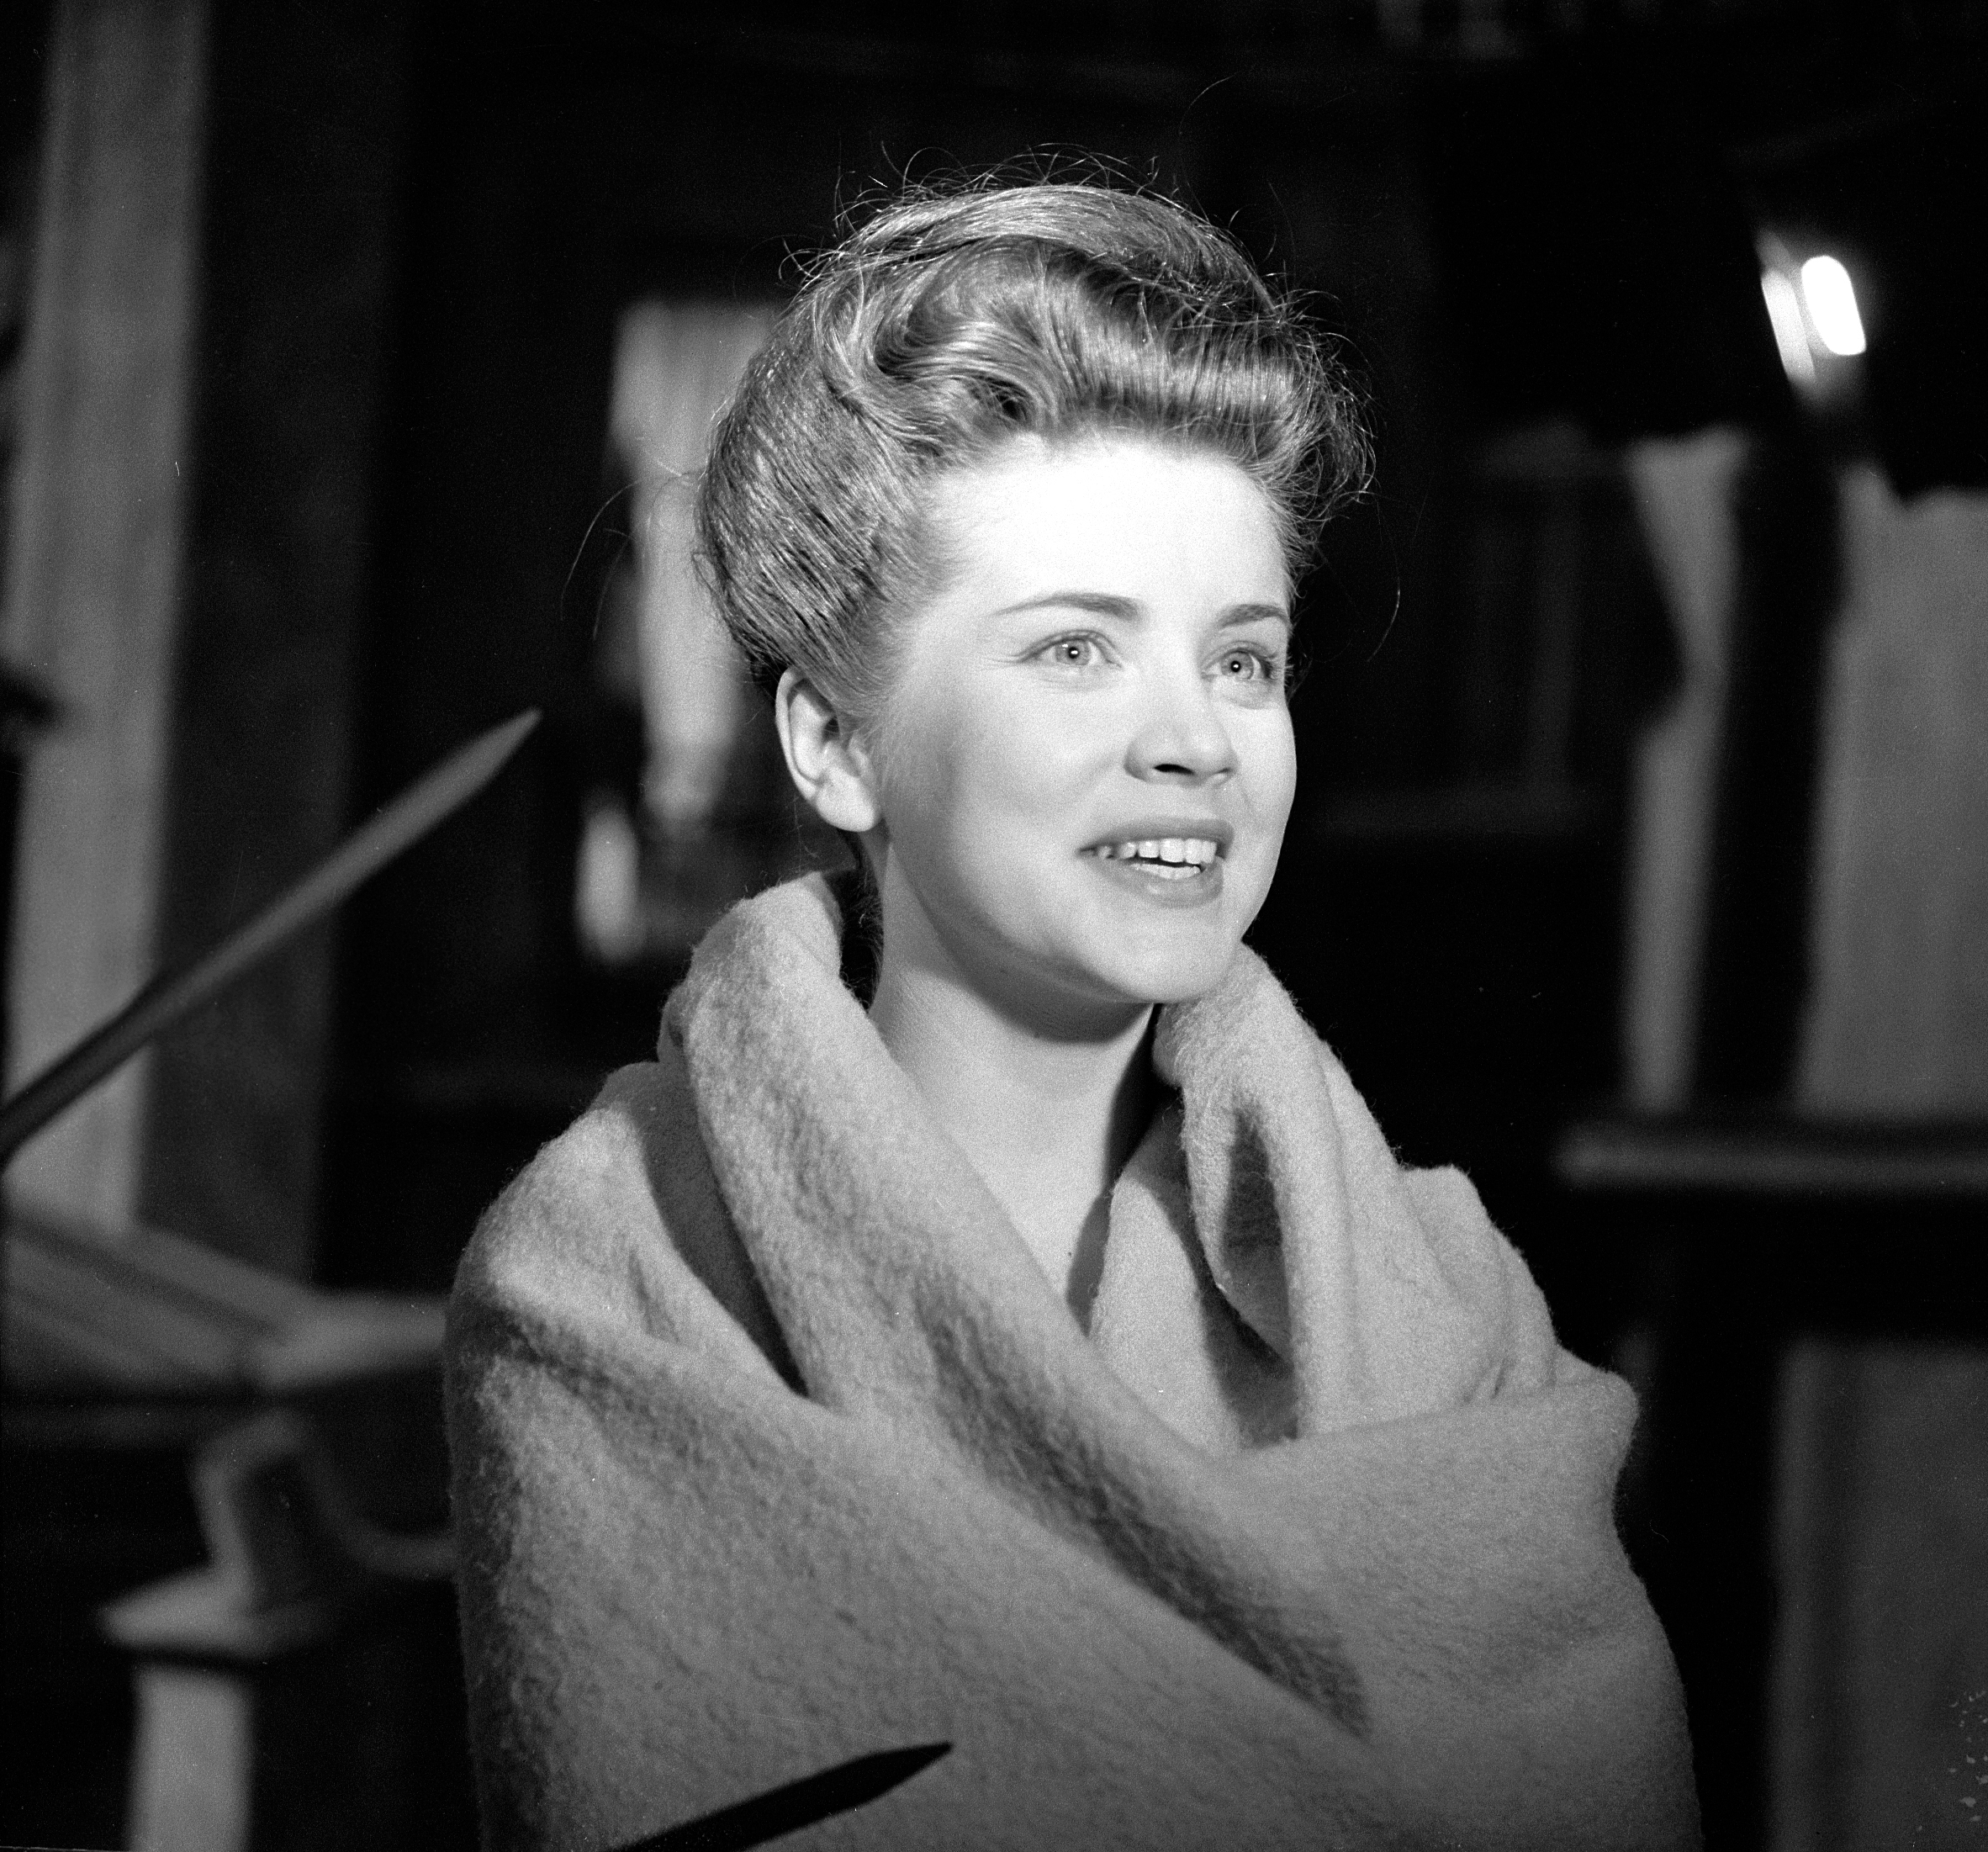 Dolores Hart smiles while wrapped in a blanket during the filming of the CBS television Playhouse 90 production of "To the Sound of Trumpets" on February 8, 1960. | Source: Getty Images